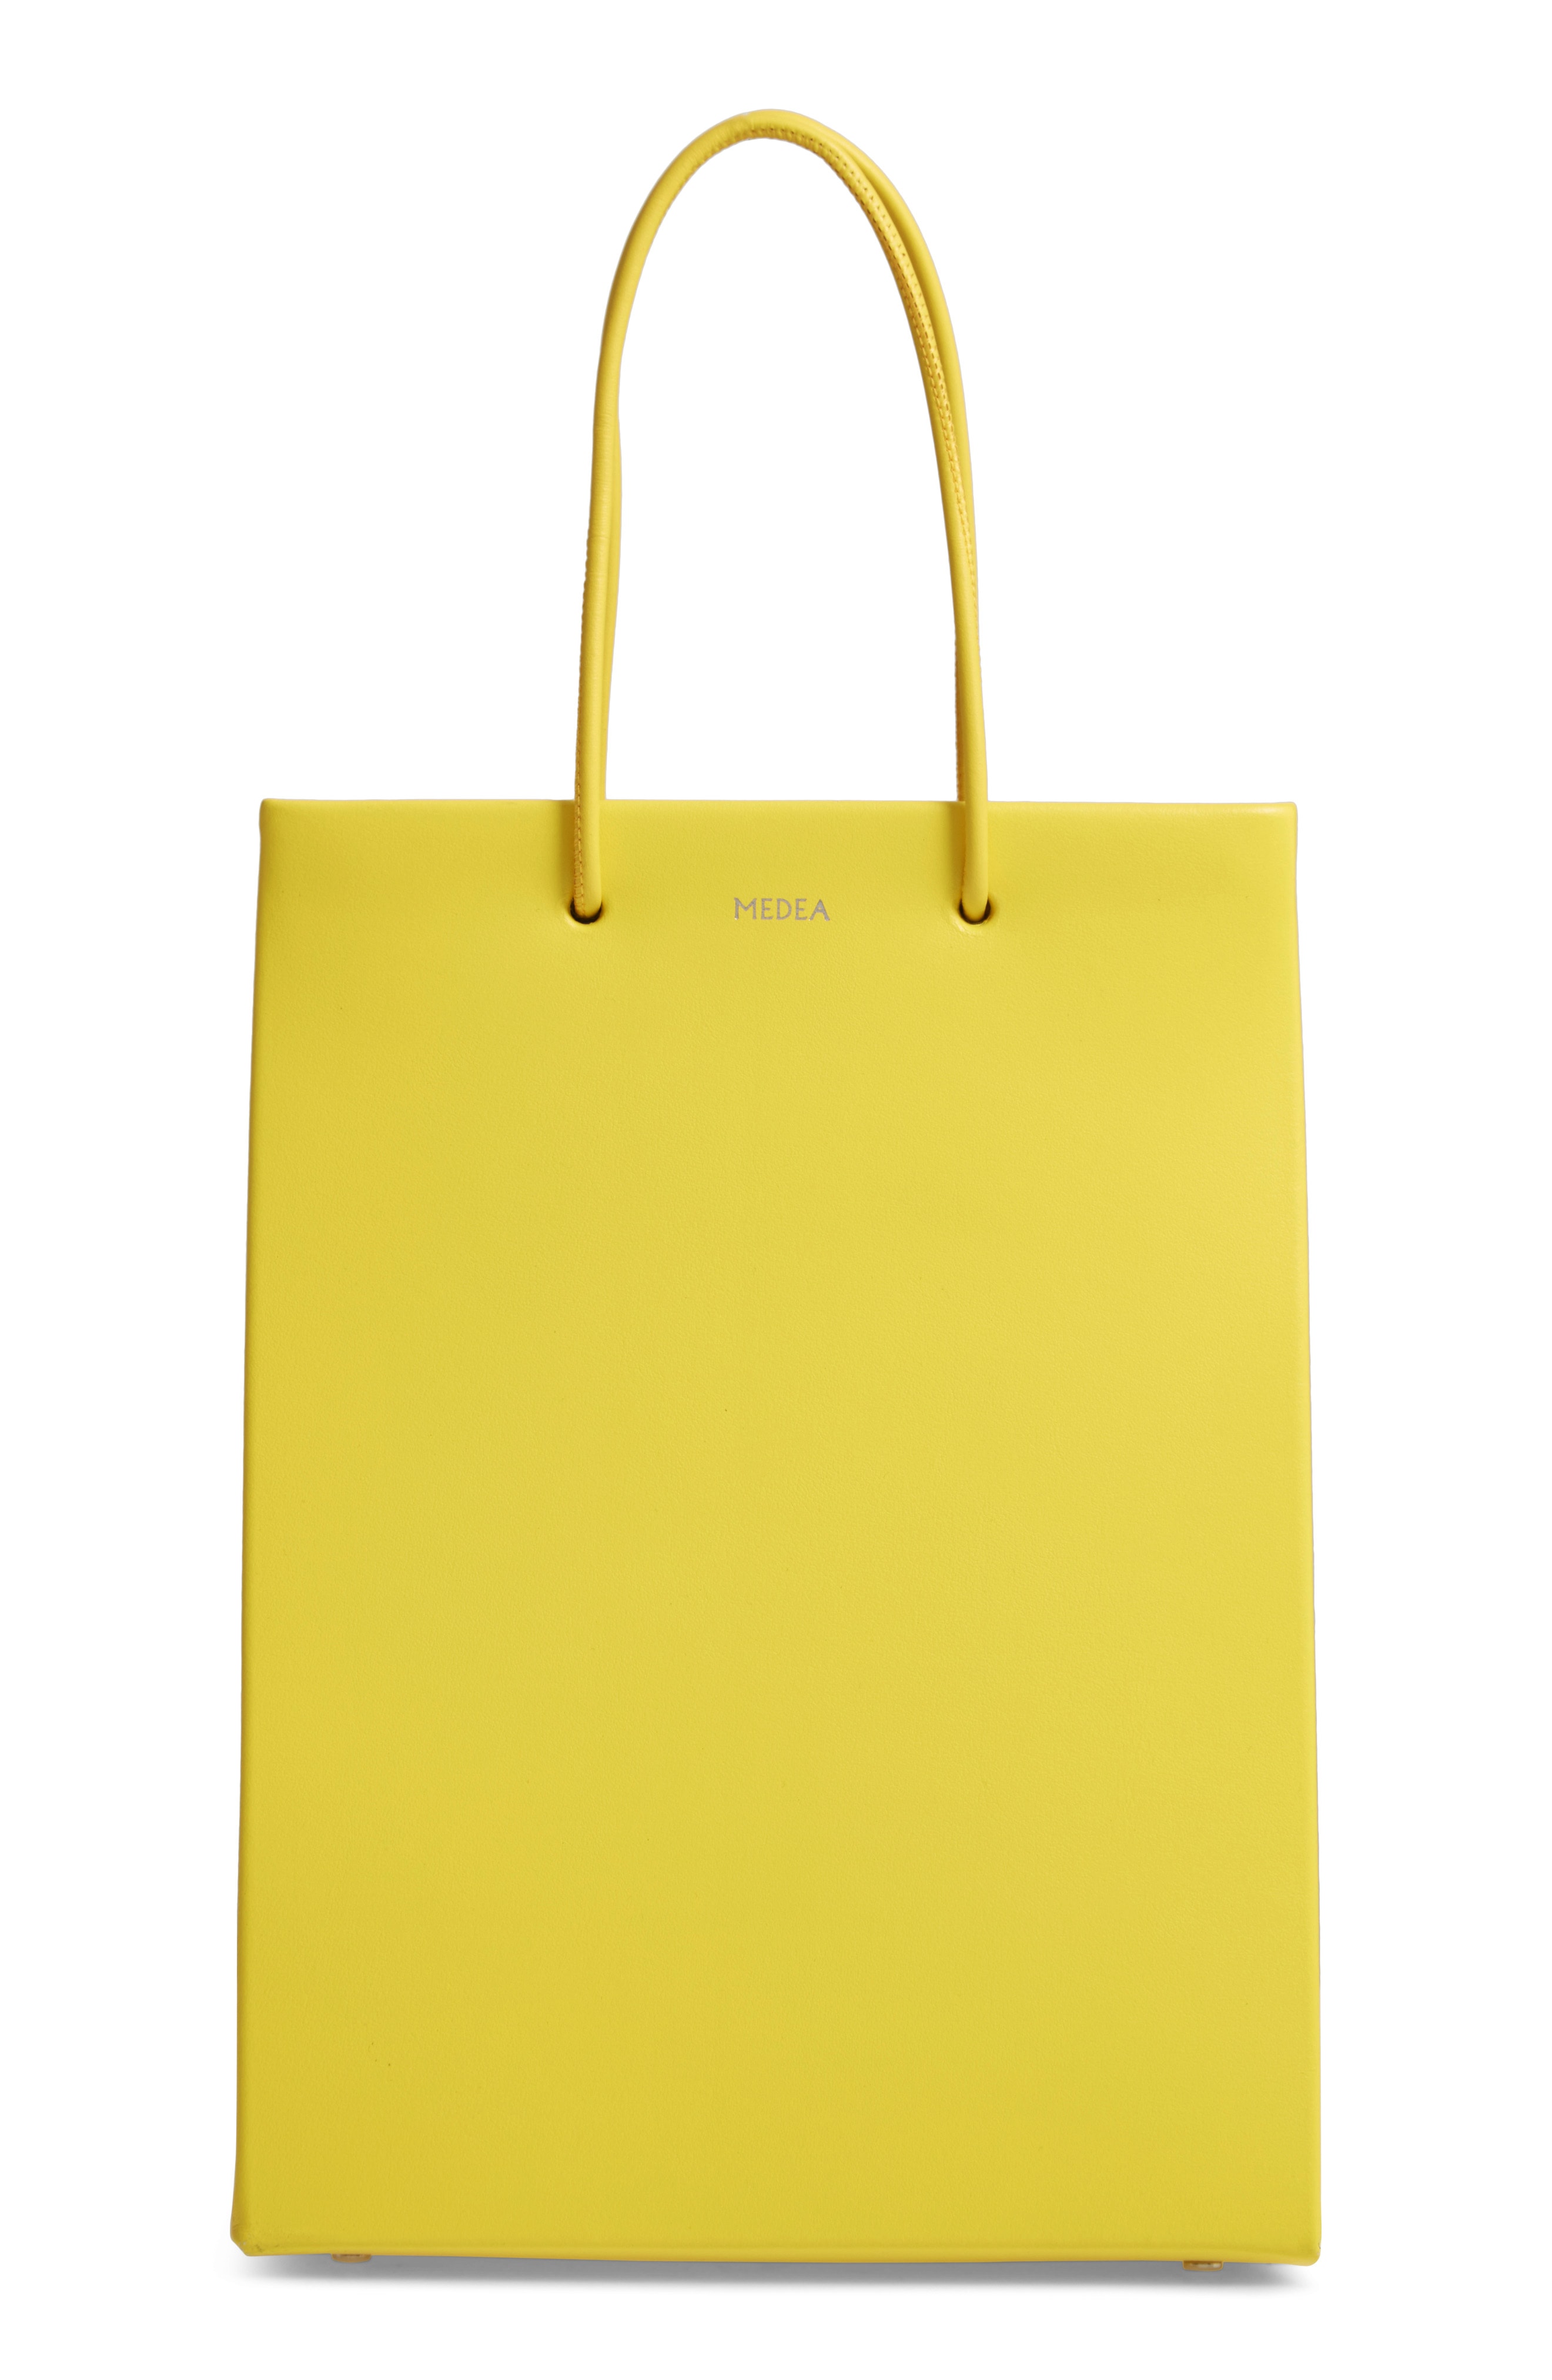 A happy asseccoire – the yellow bag